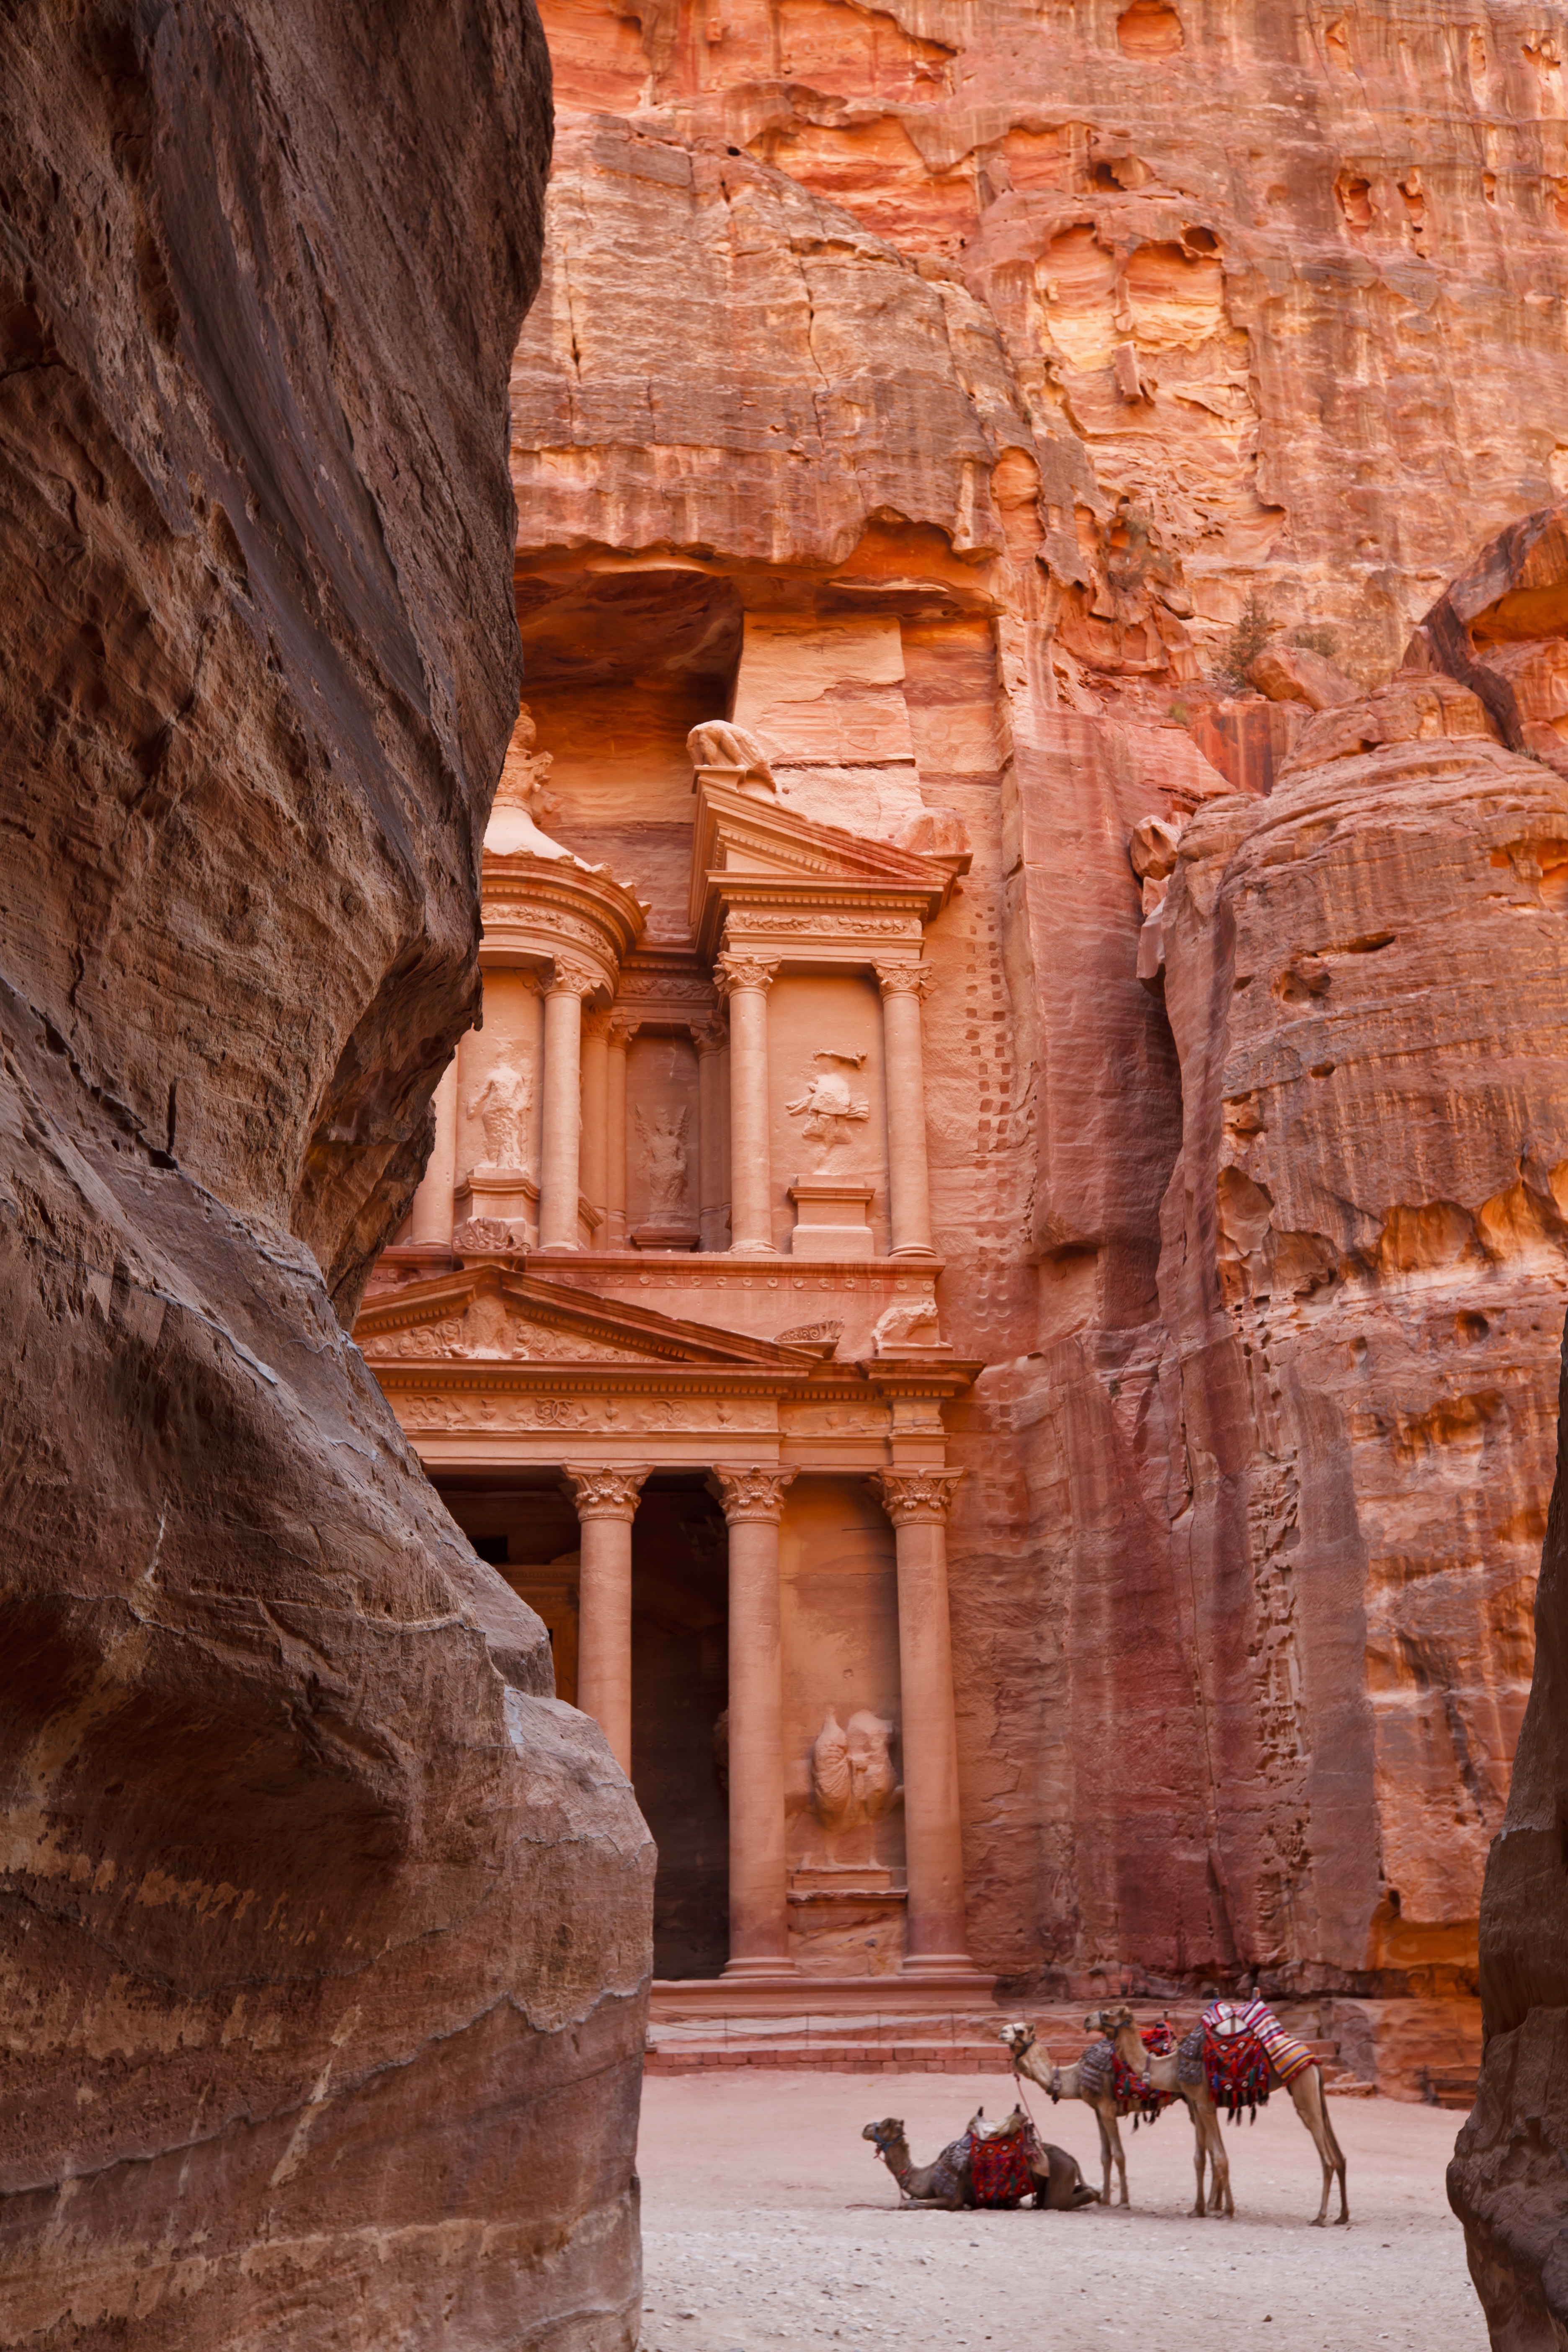 View of camels resting in front of the Treasury, known locally as Al Khazneh, as seen from the main entrance to the ancient city, known locally as Al-Siq, located in the UNESCO World Heritage Site of Petra, or Rose-Red city, which was the 6th century capital city of the Nabataeans.